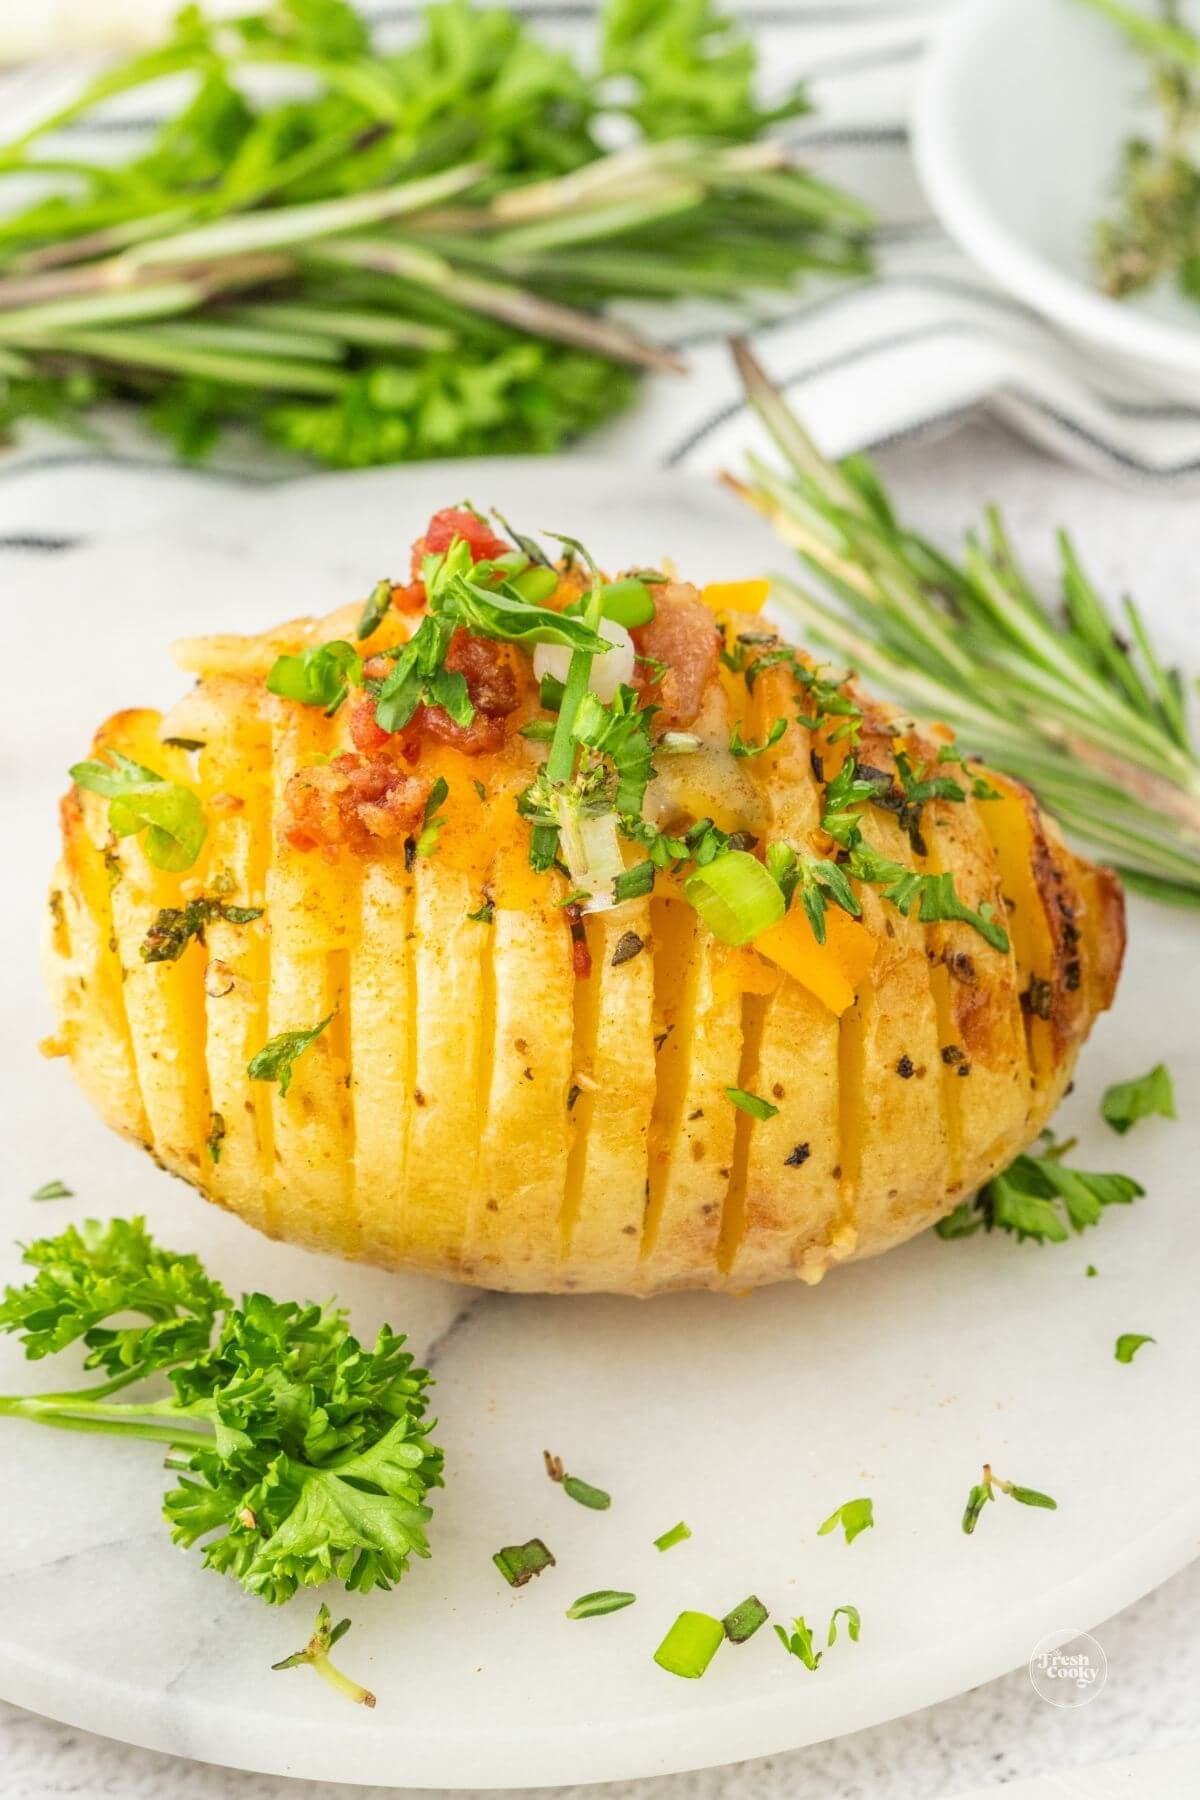 Hasselback potato in plate topped with a little shredded cheese, parsley and bacon bits.